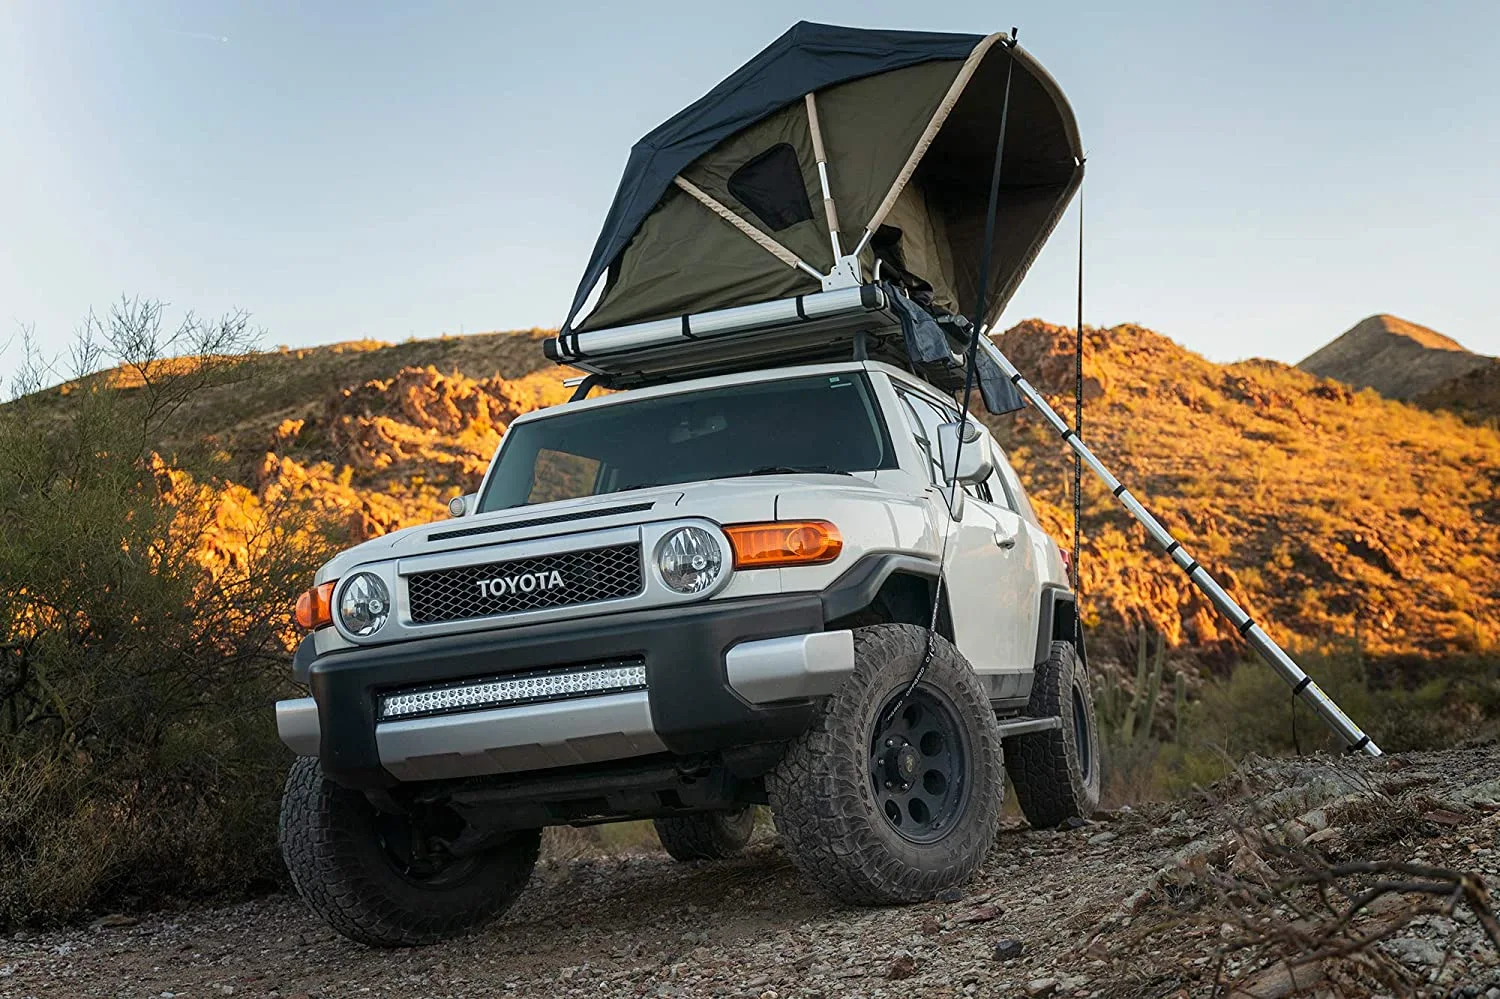 Raptor series best SUV rooftop tent for SUVs and Jeeps